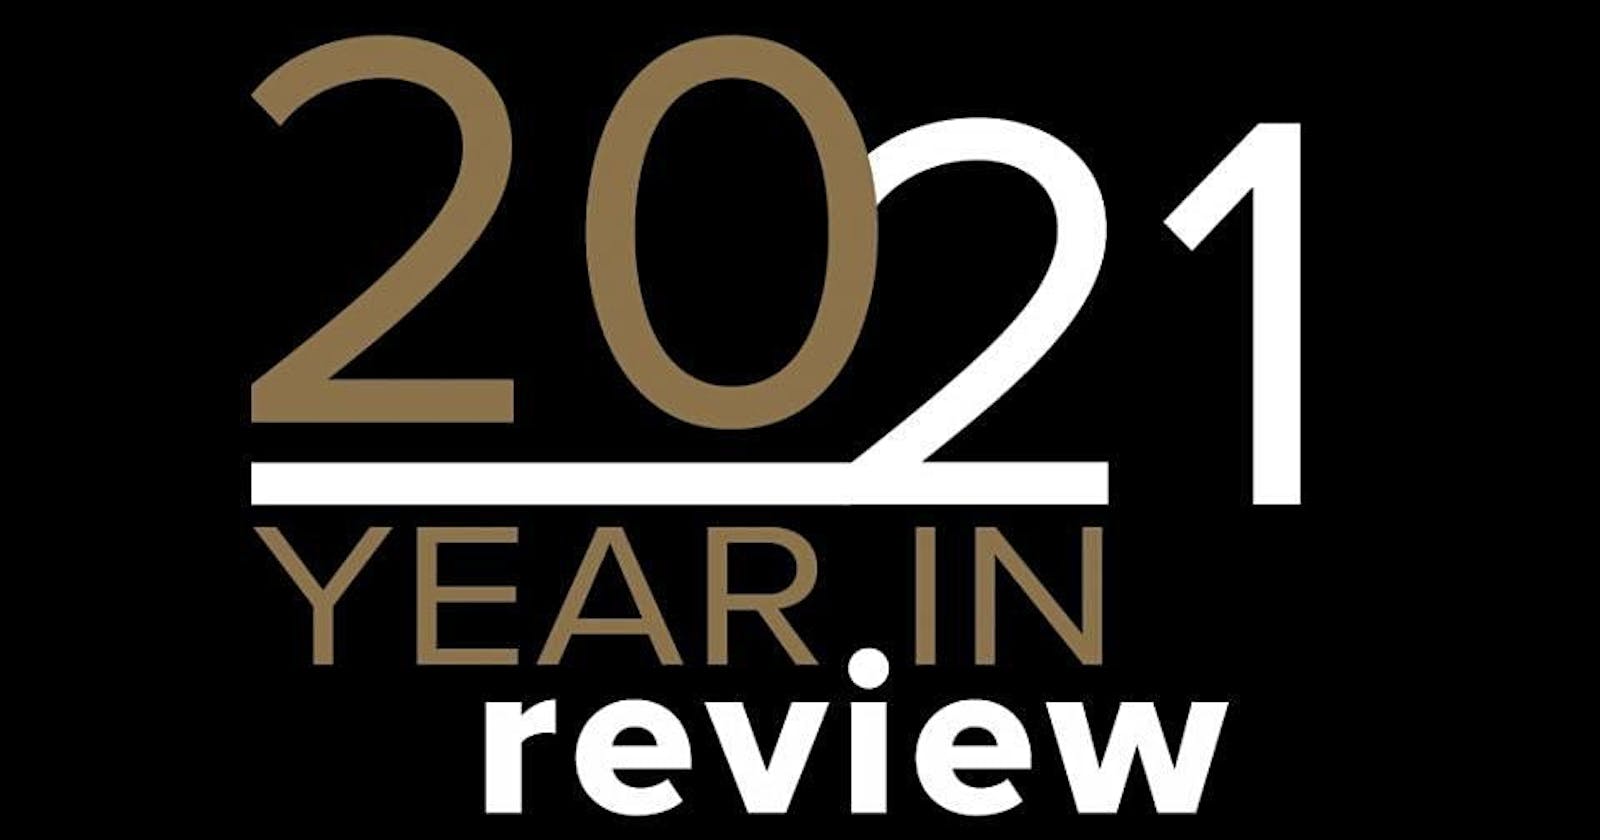 My Year in Review 2021 - Journey, Opportunities, Accomplishments, Lessons Learned